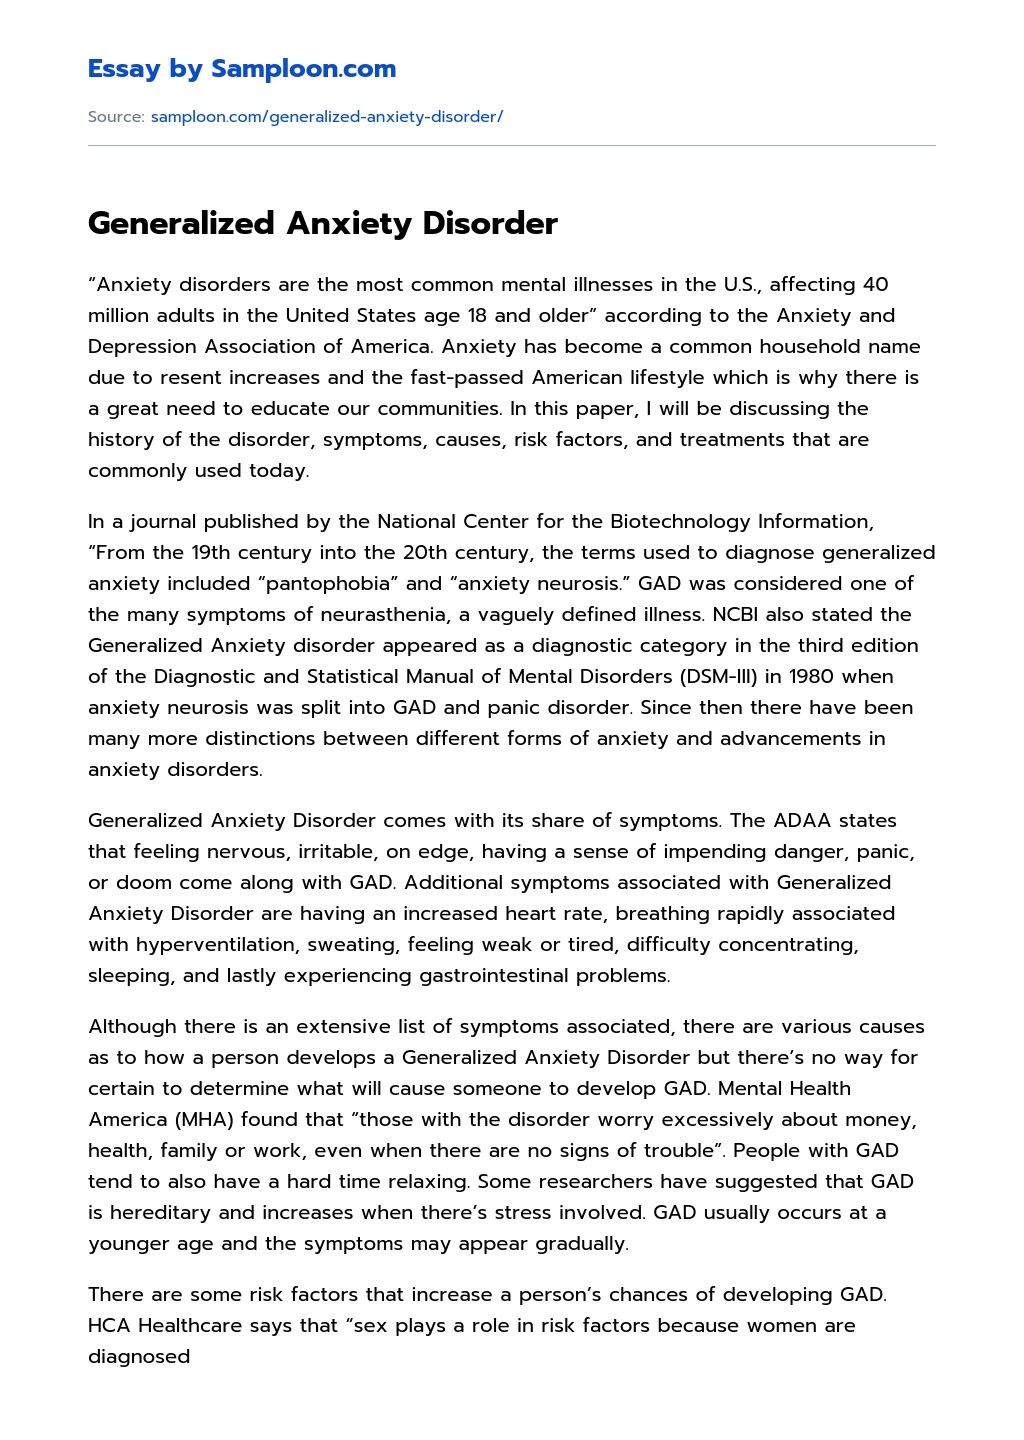 Generalized Anxiety Disorder essay